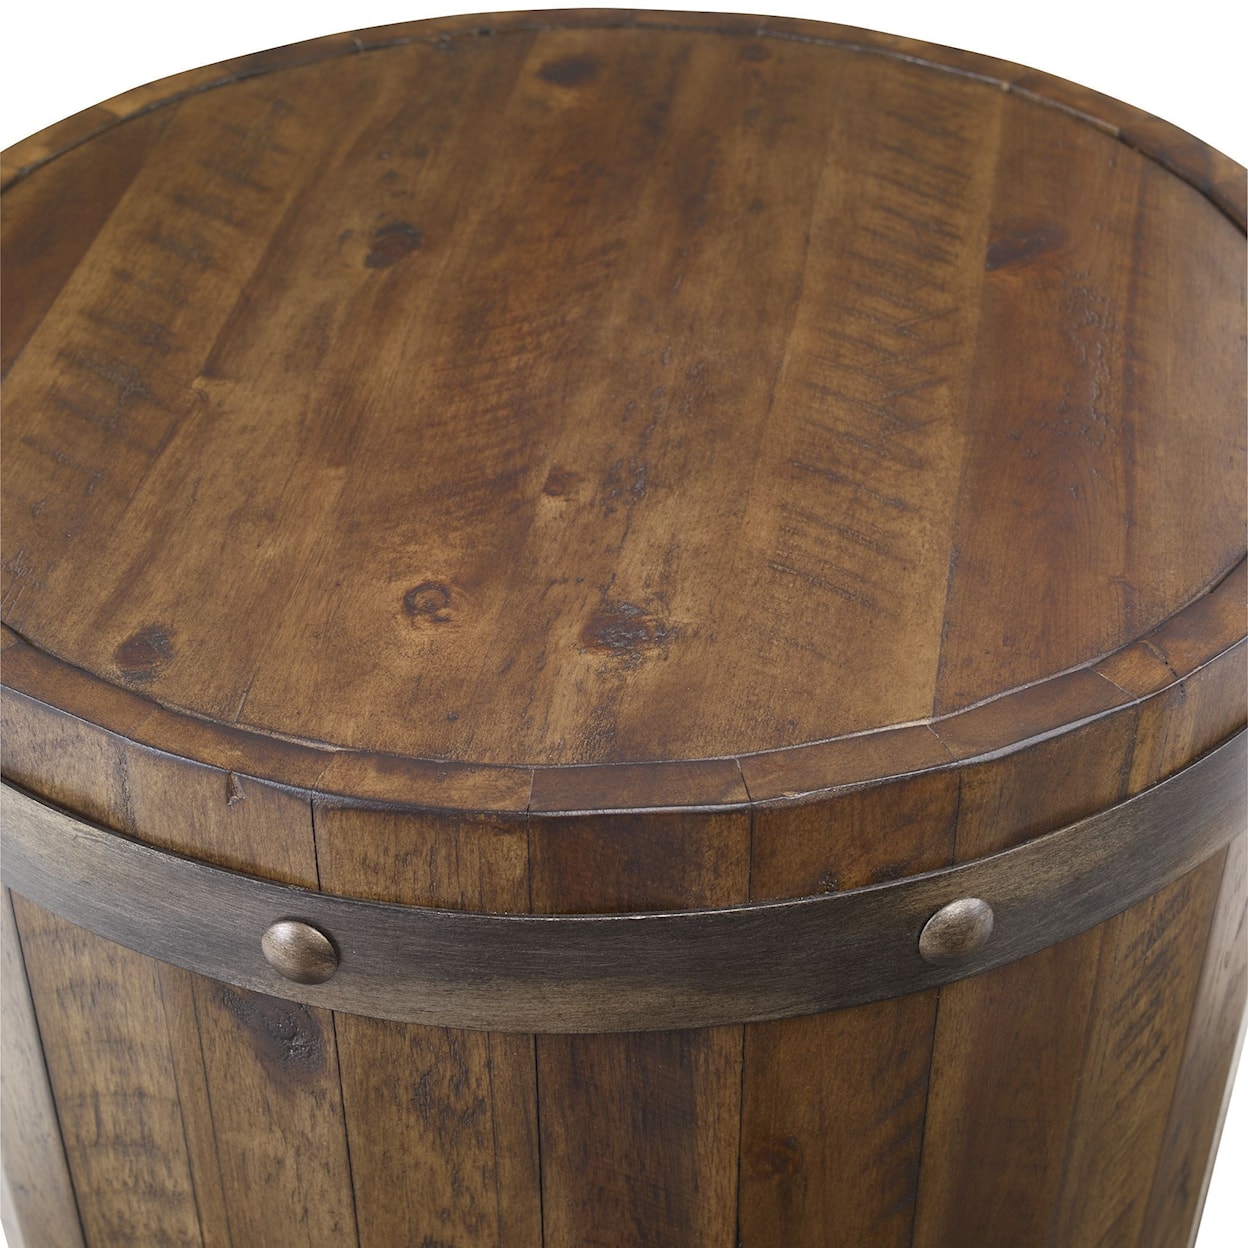 Uttermost Accent Furniture - Occasional Tables Ceylon Wine Barrel Accent Table